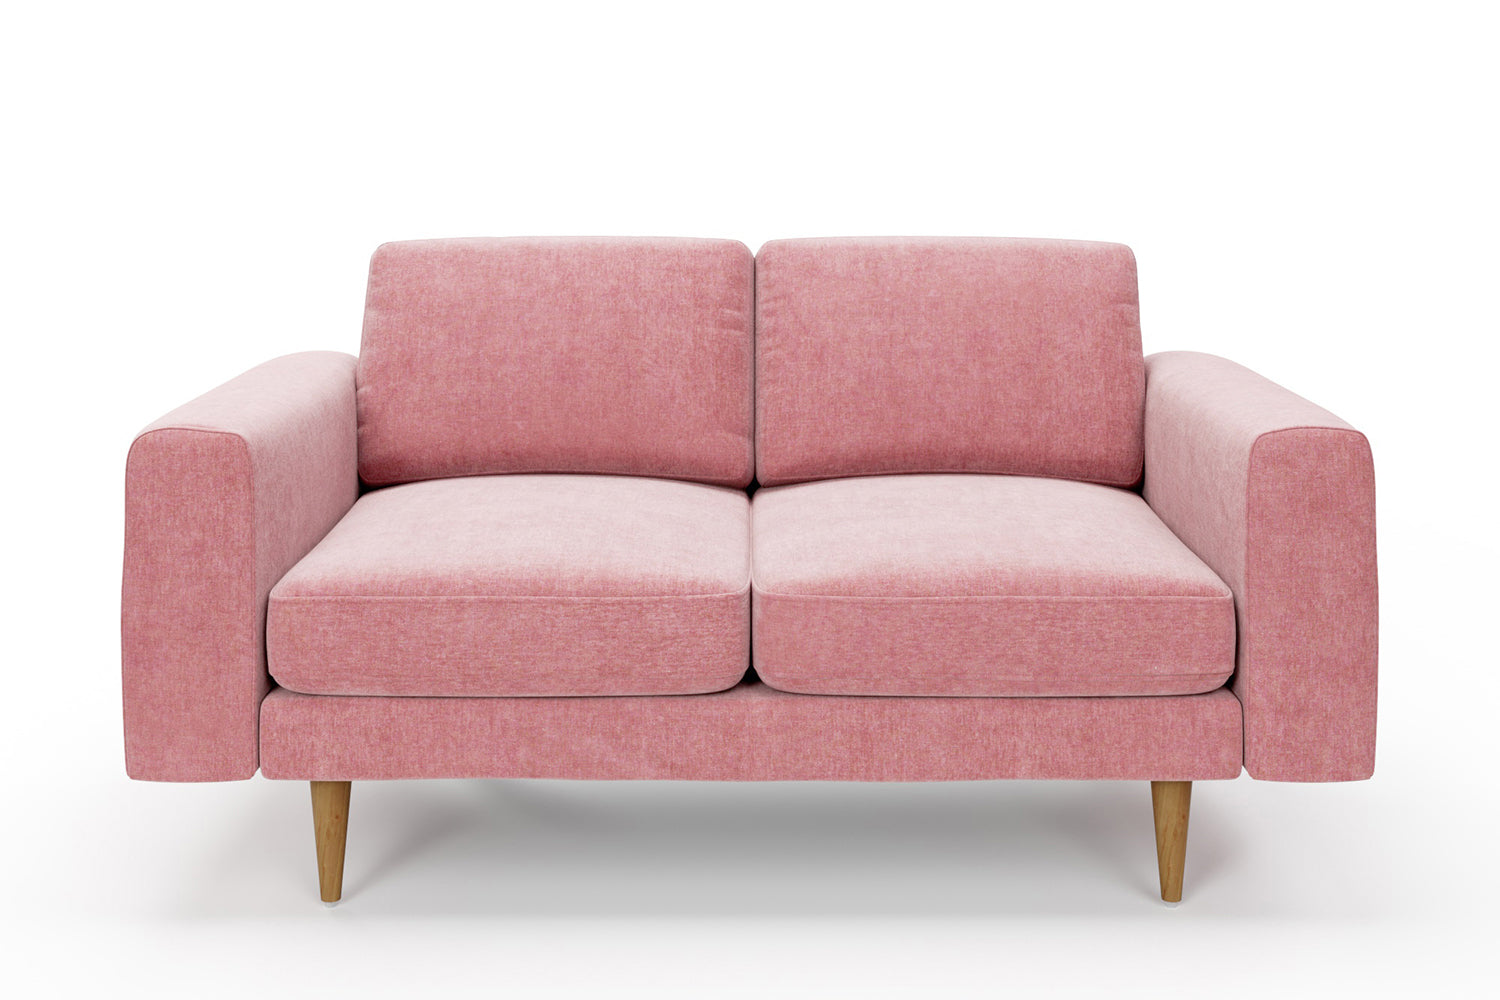 SNUG | The Big Chill 2 Seater Sofa in Blush Coral variant_40621880148016